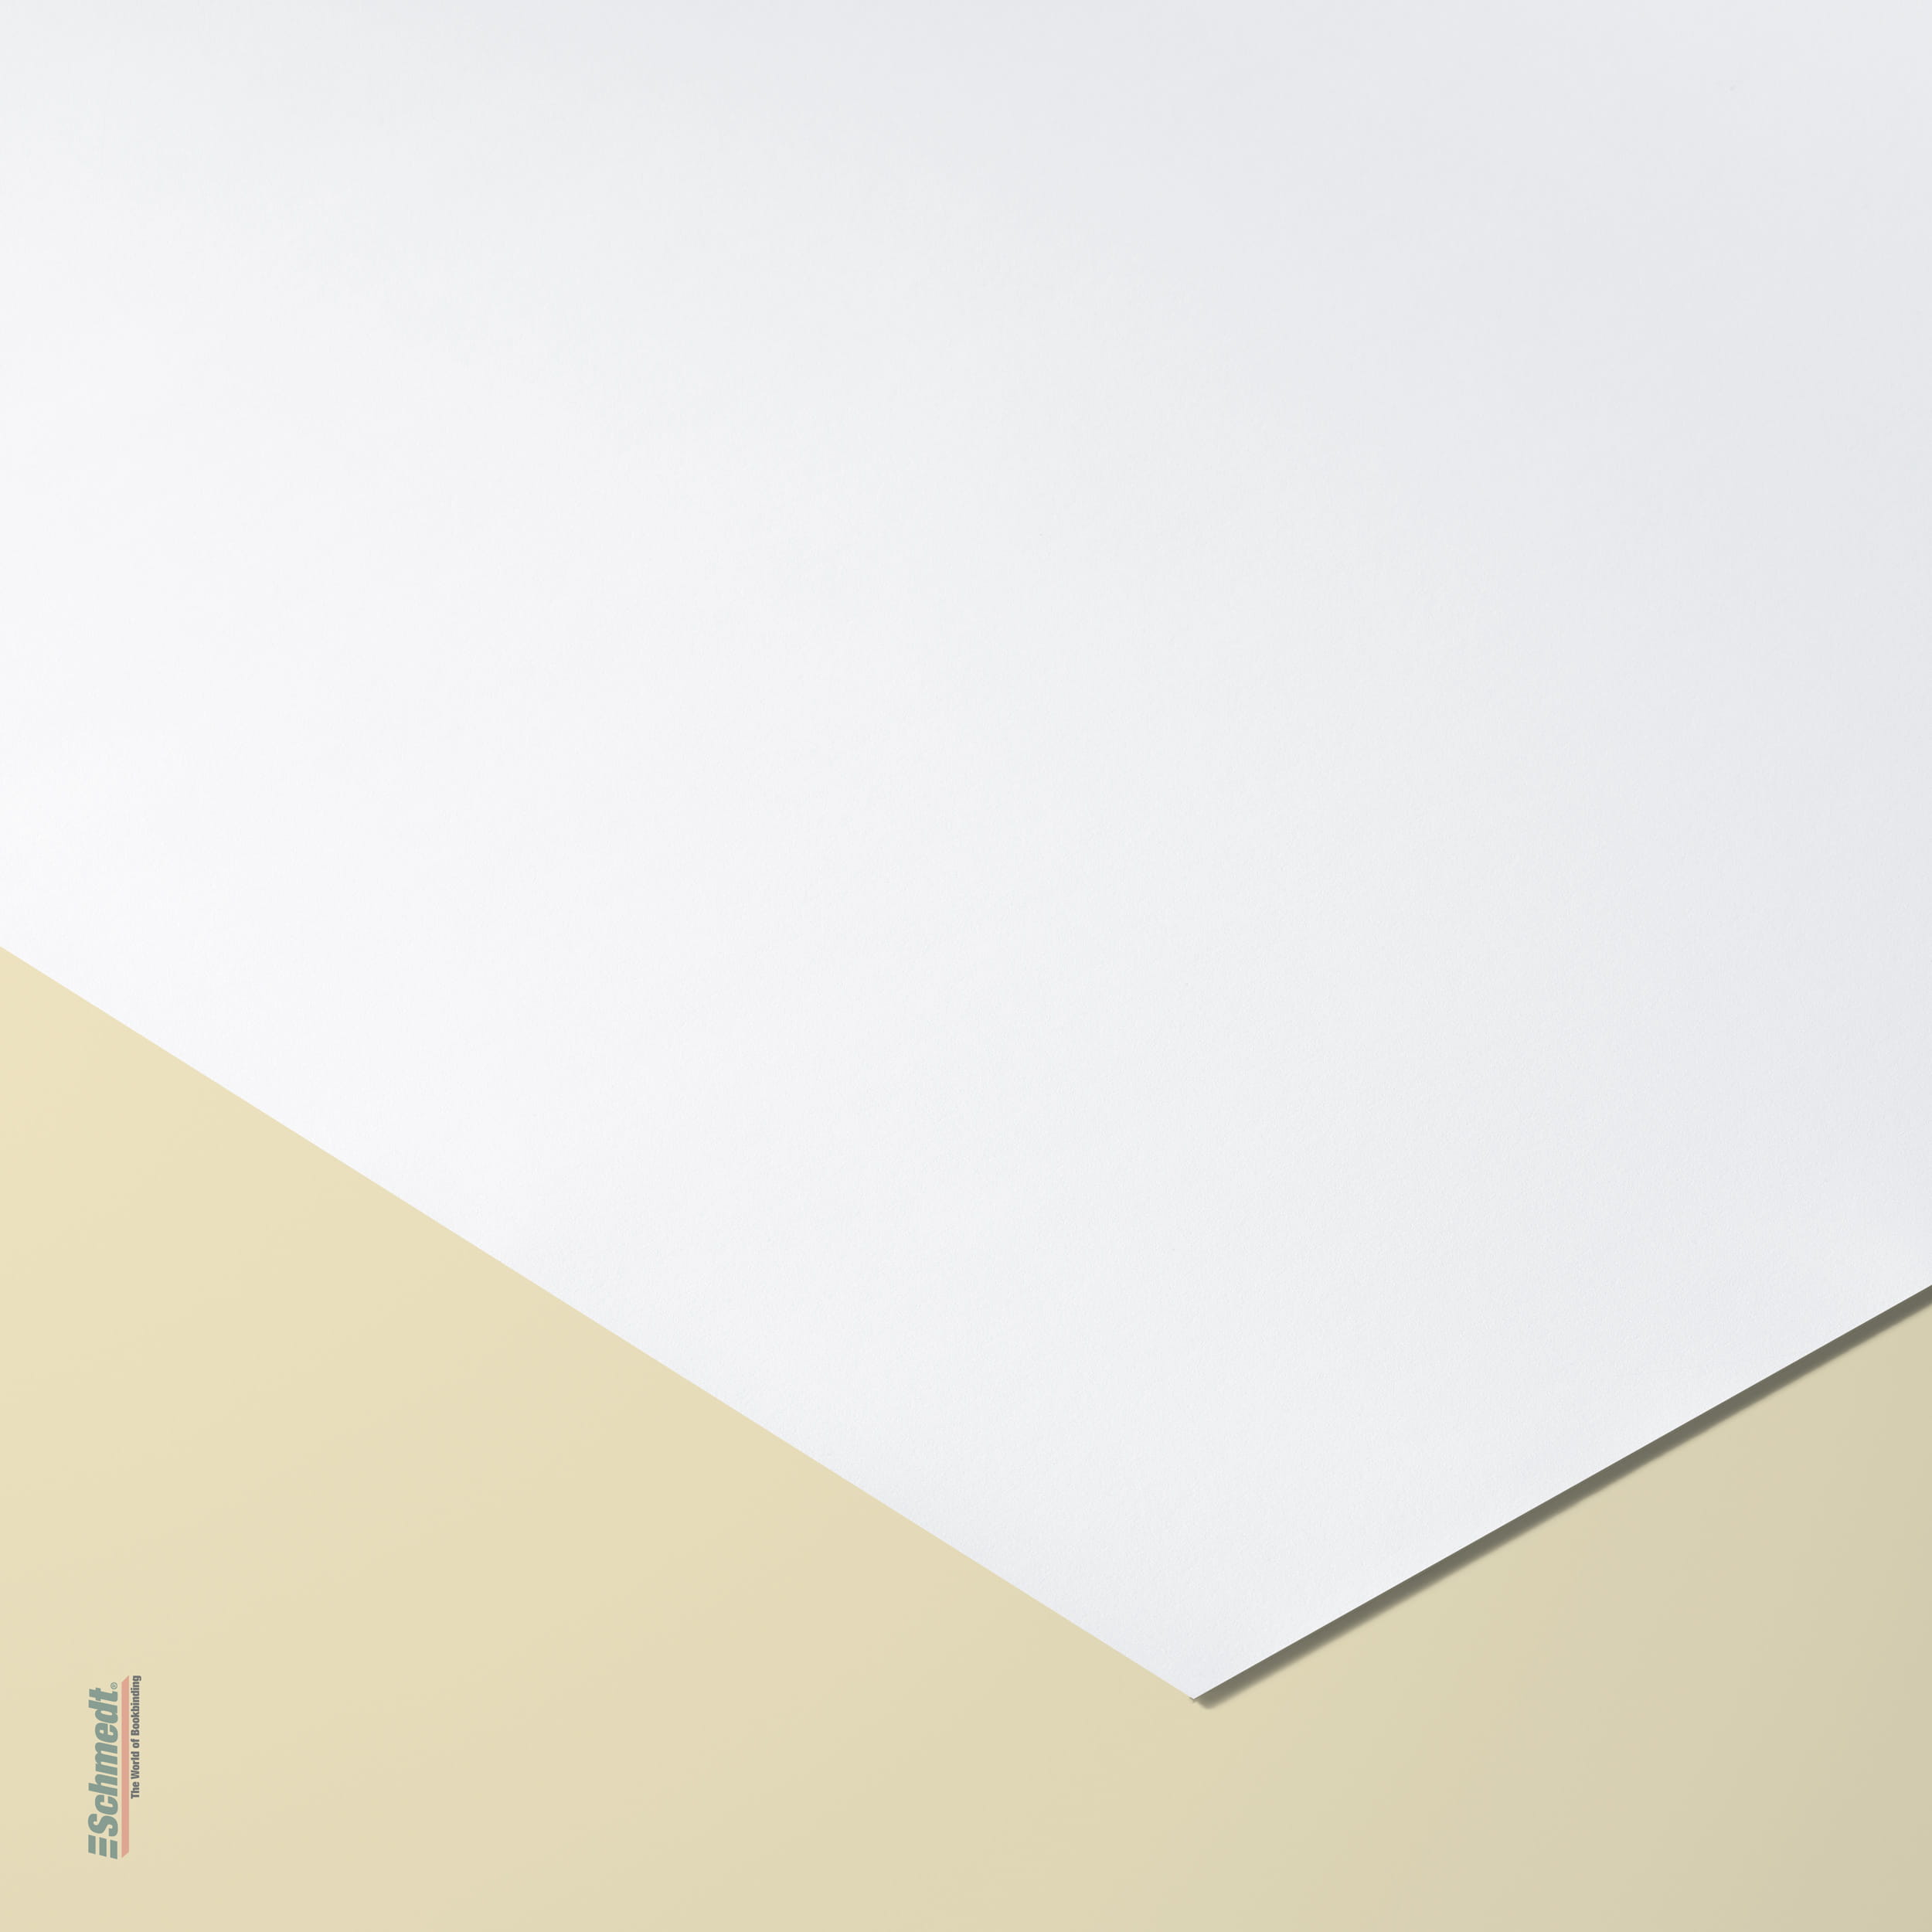 End paper, smooth (wove) - bluish white, End papers